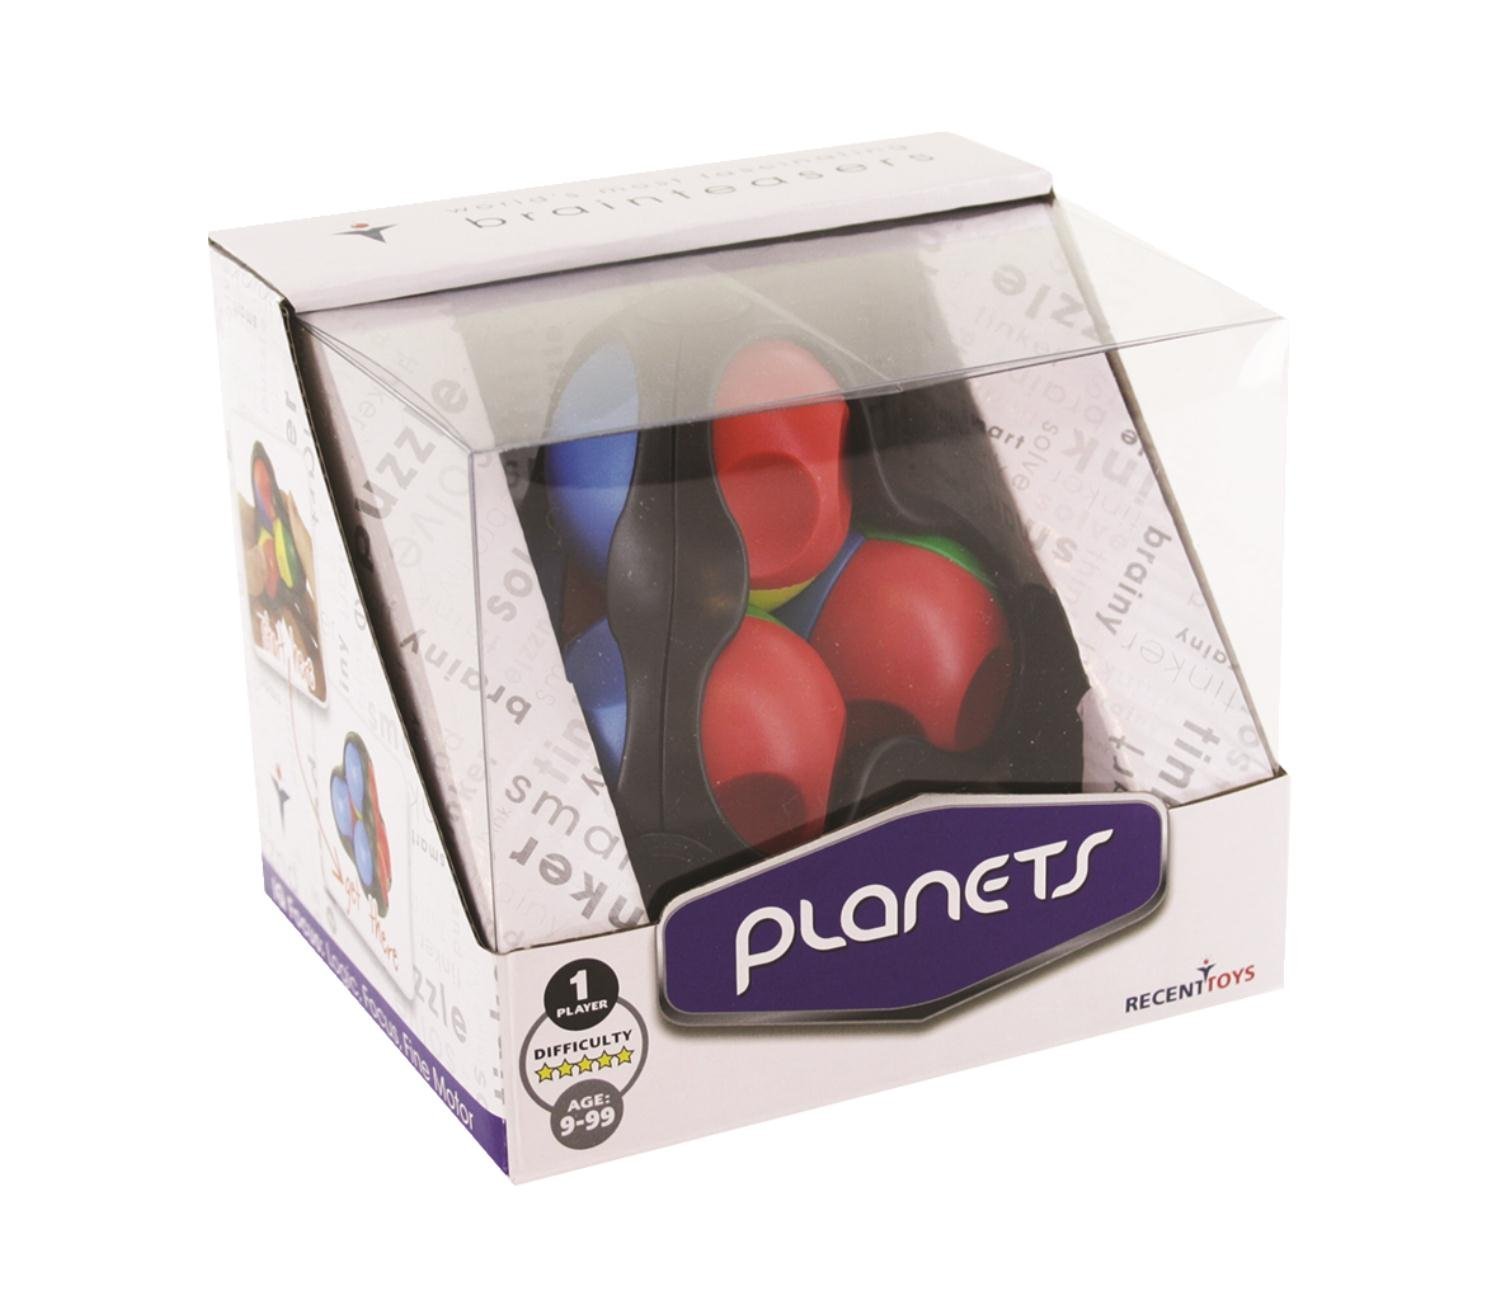 Planets | Recent Toys